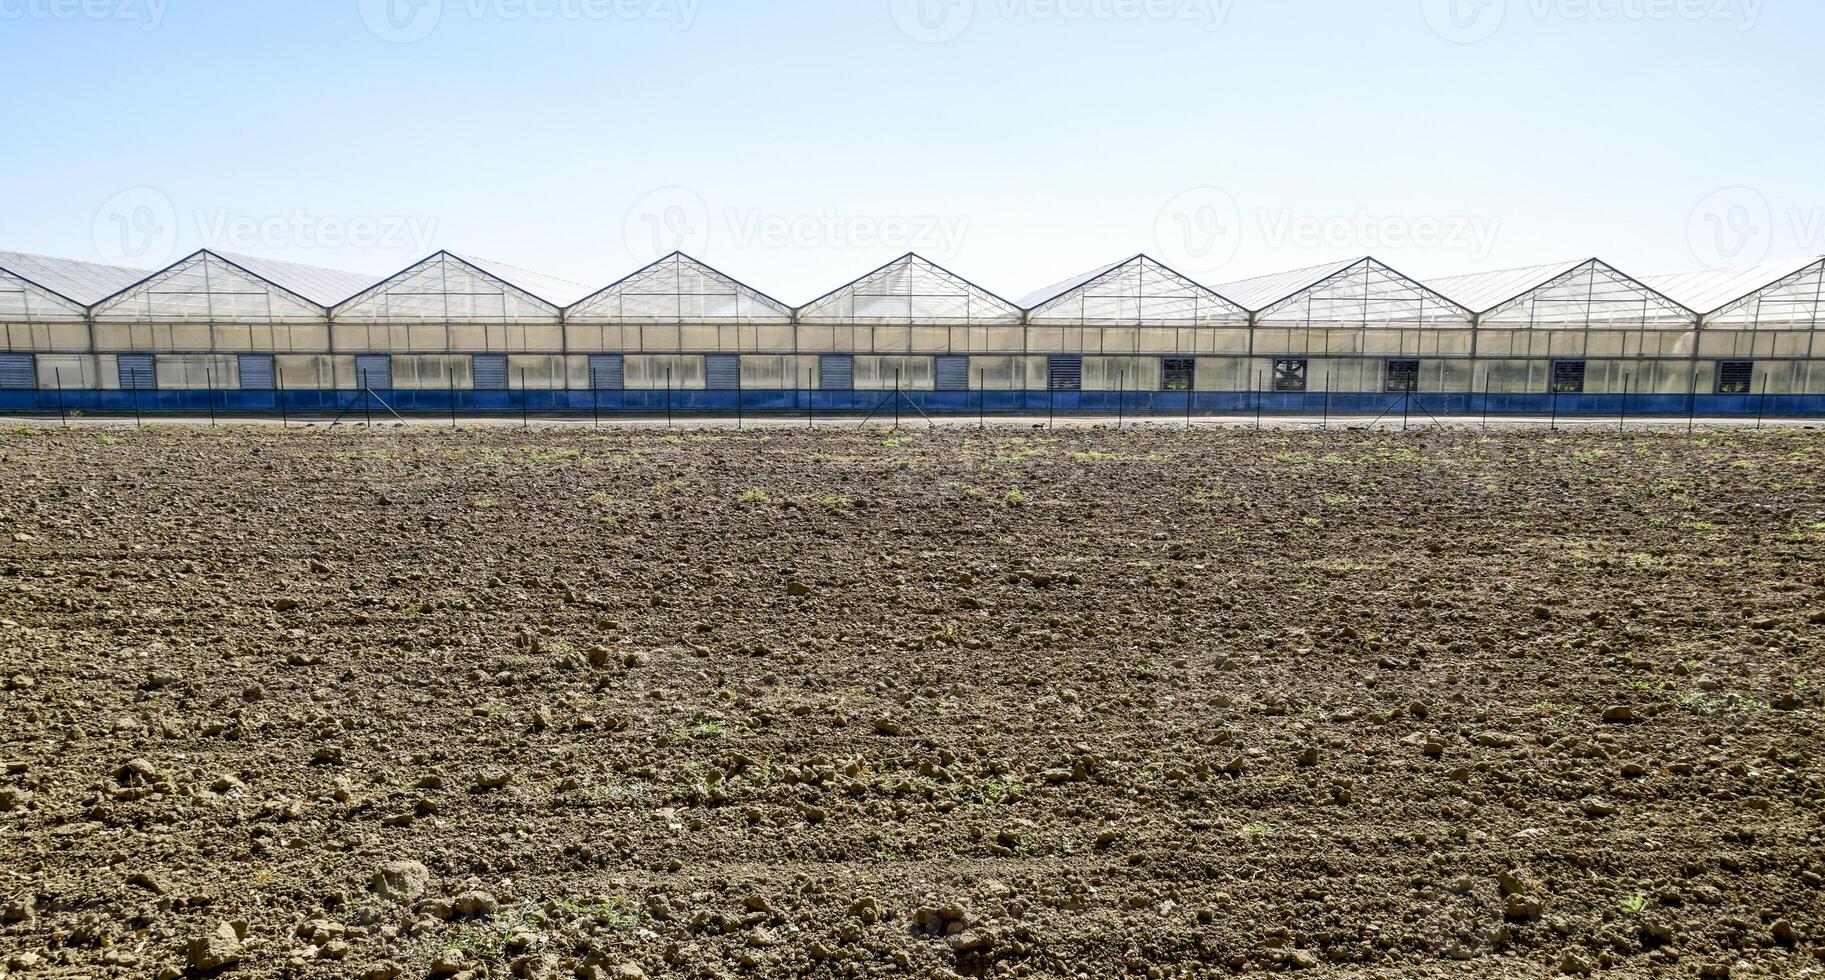 Polycarbonate greenhouses. Greenhouse complex. Greenhouses for growing vegetables under the closed ground photo